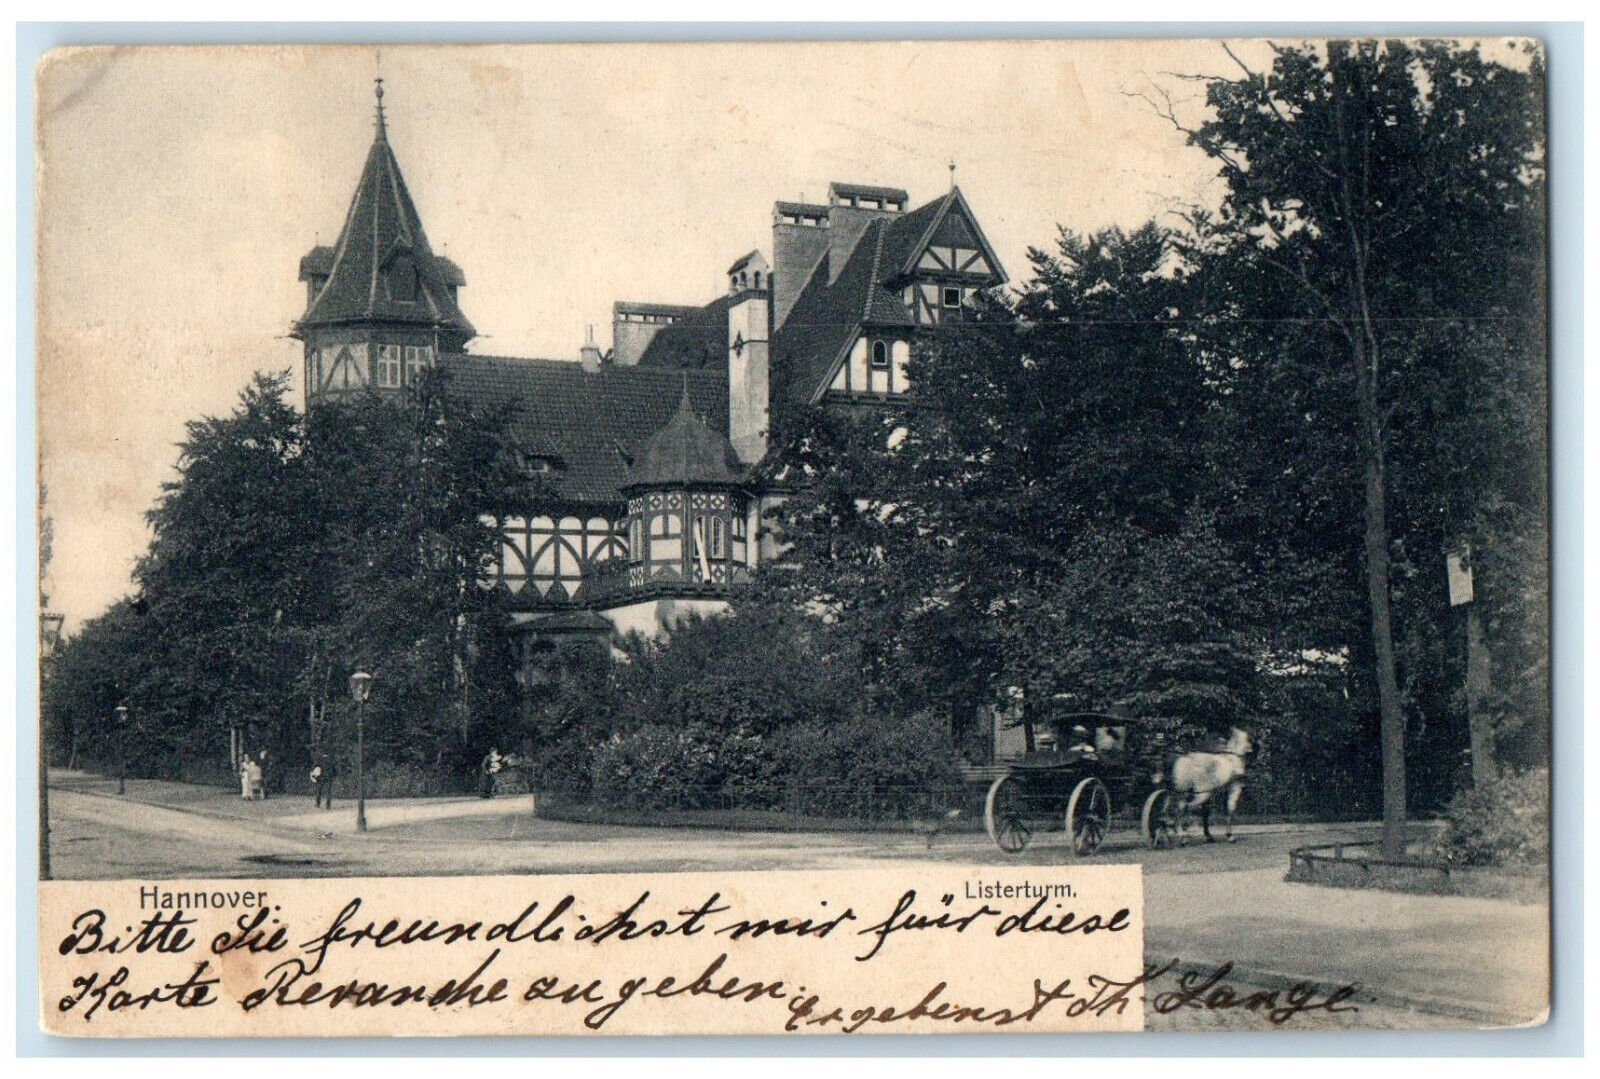 1904 Lister Turm Hanover Lower Saxony Germany Horse Carriage Posted Postcard